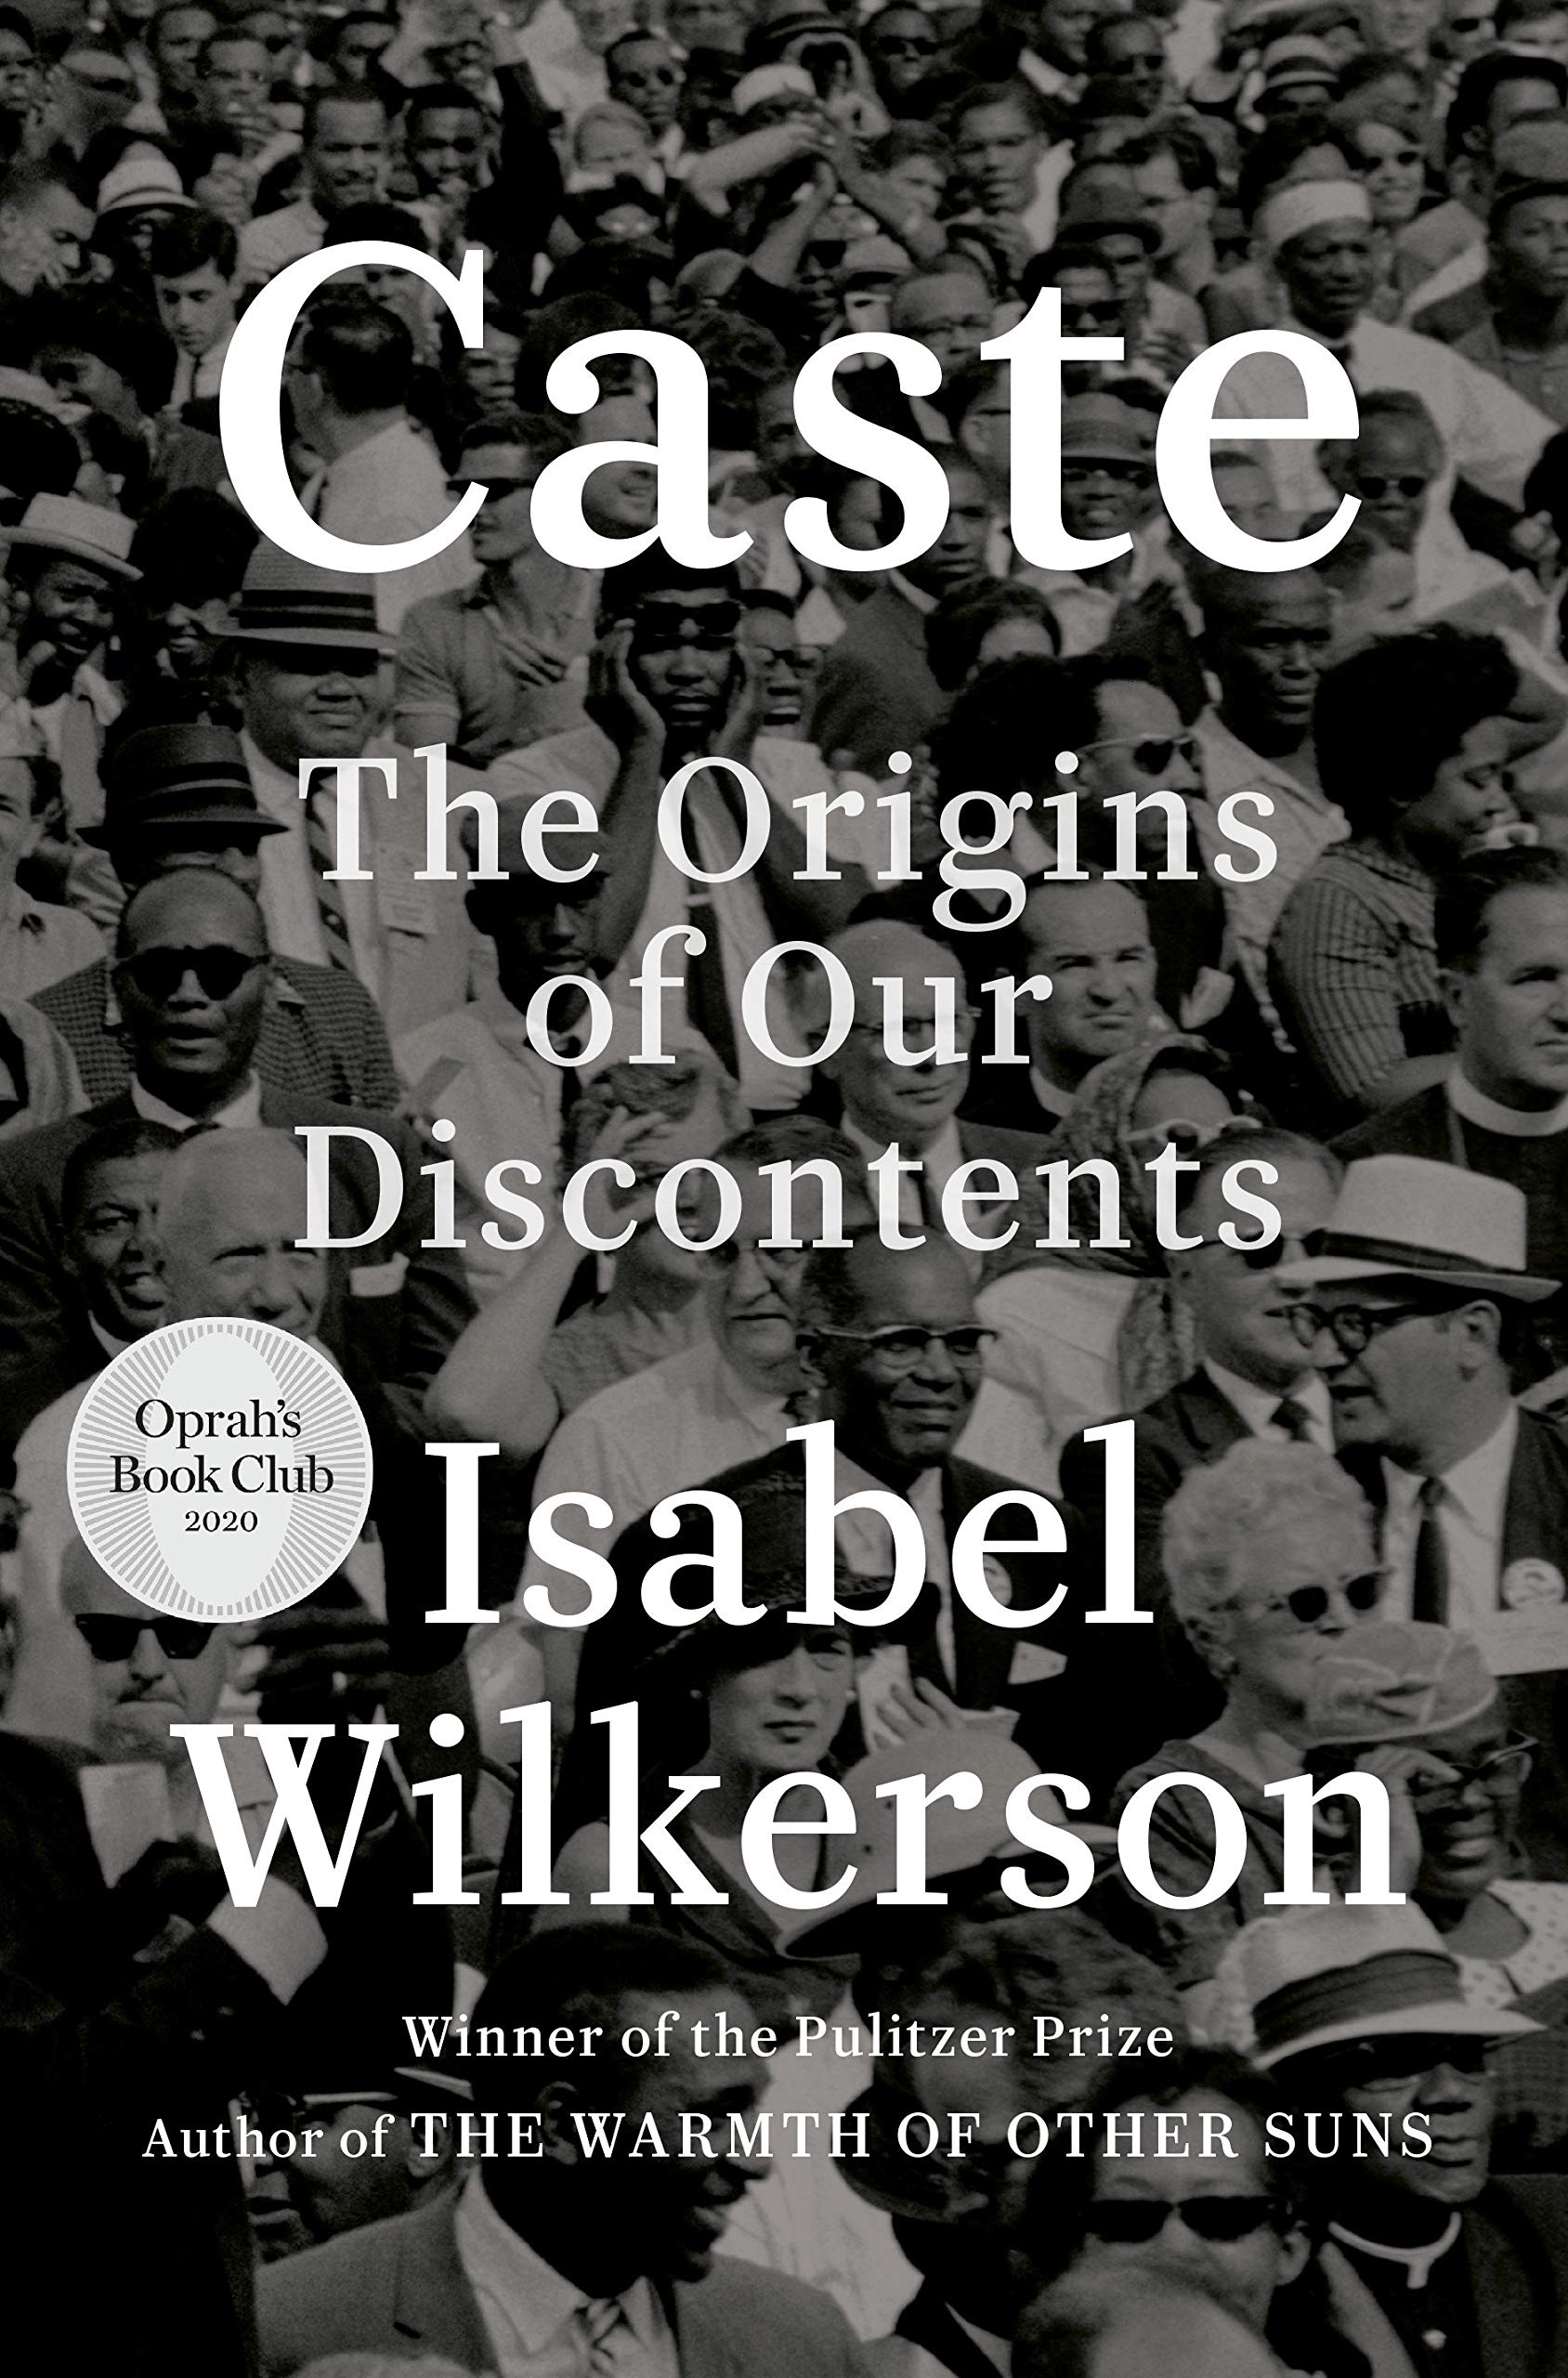 Cast: The Origins of Our Discontents by Isabel Wilkerson